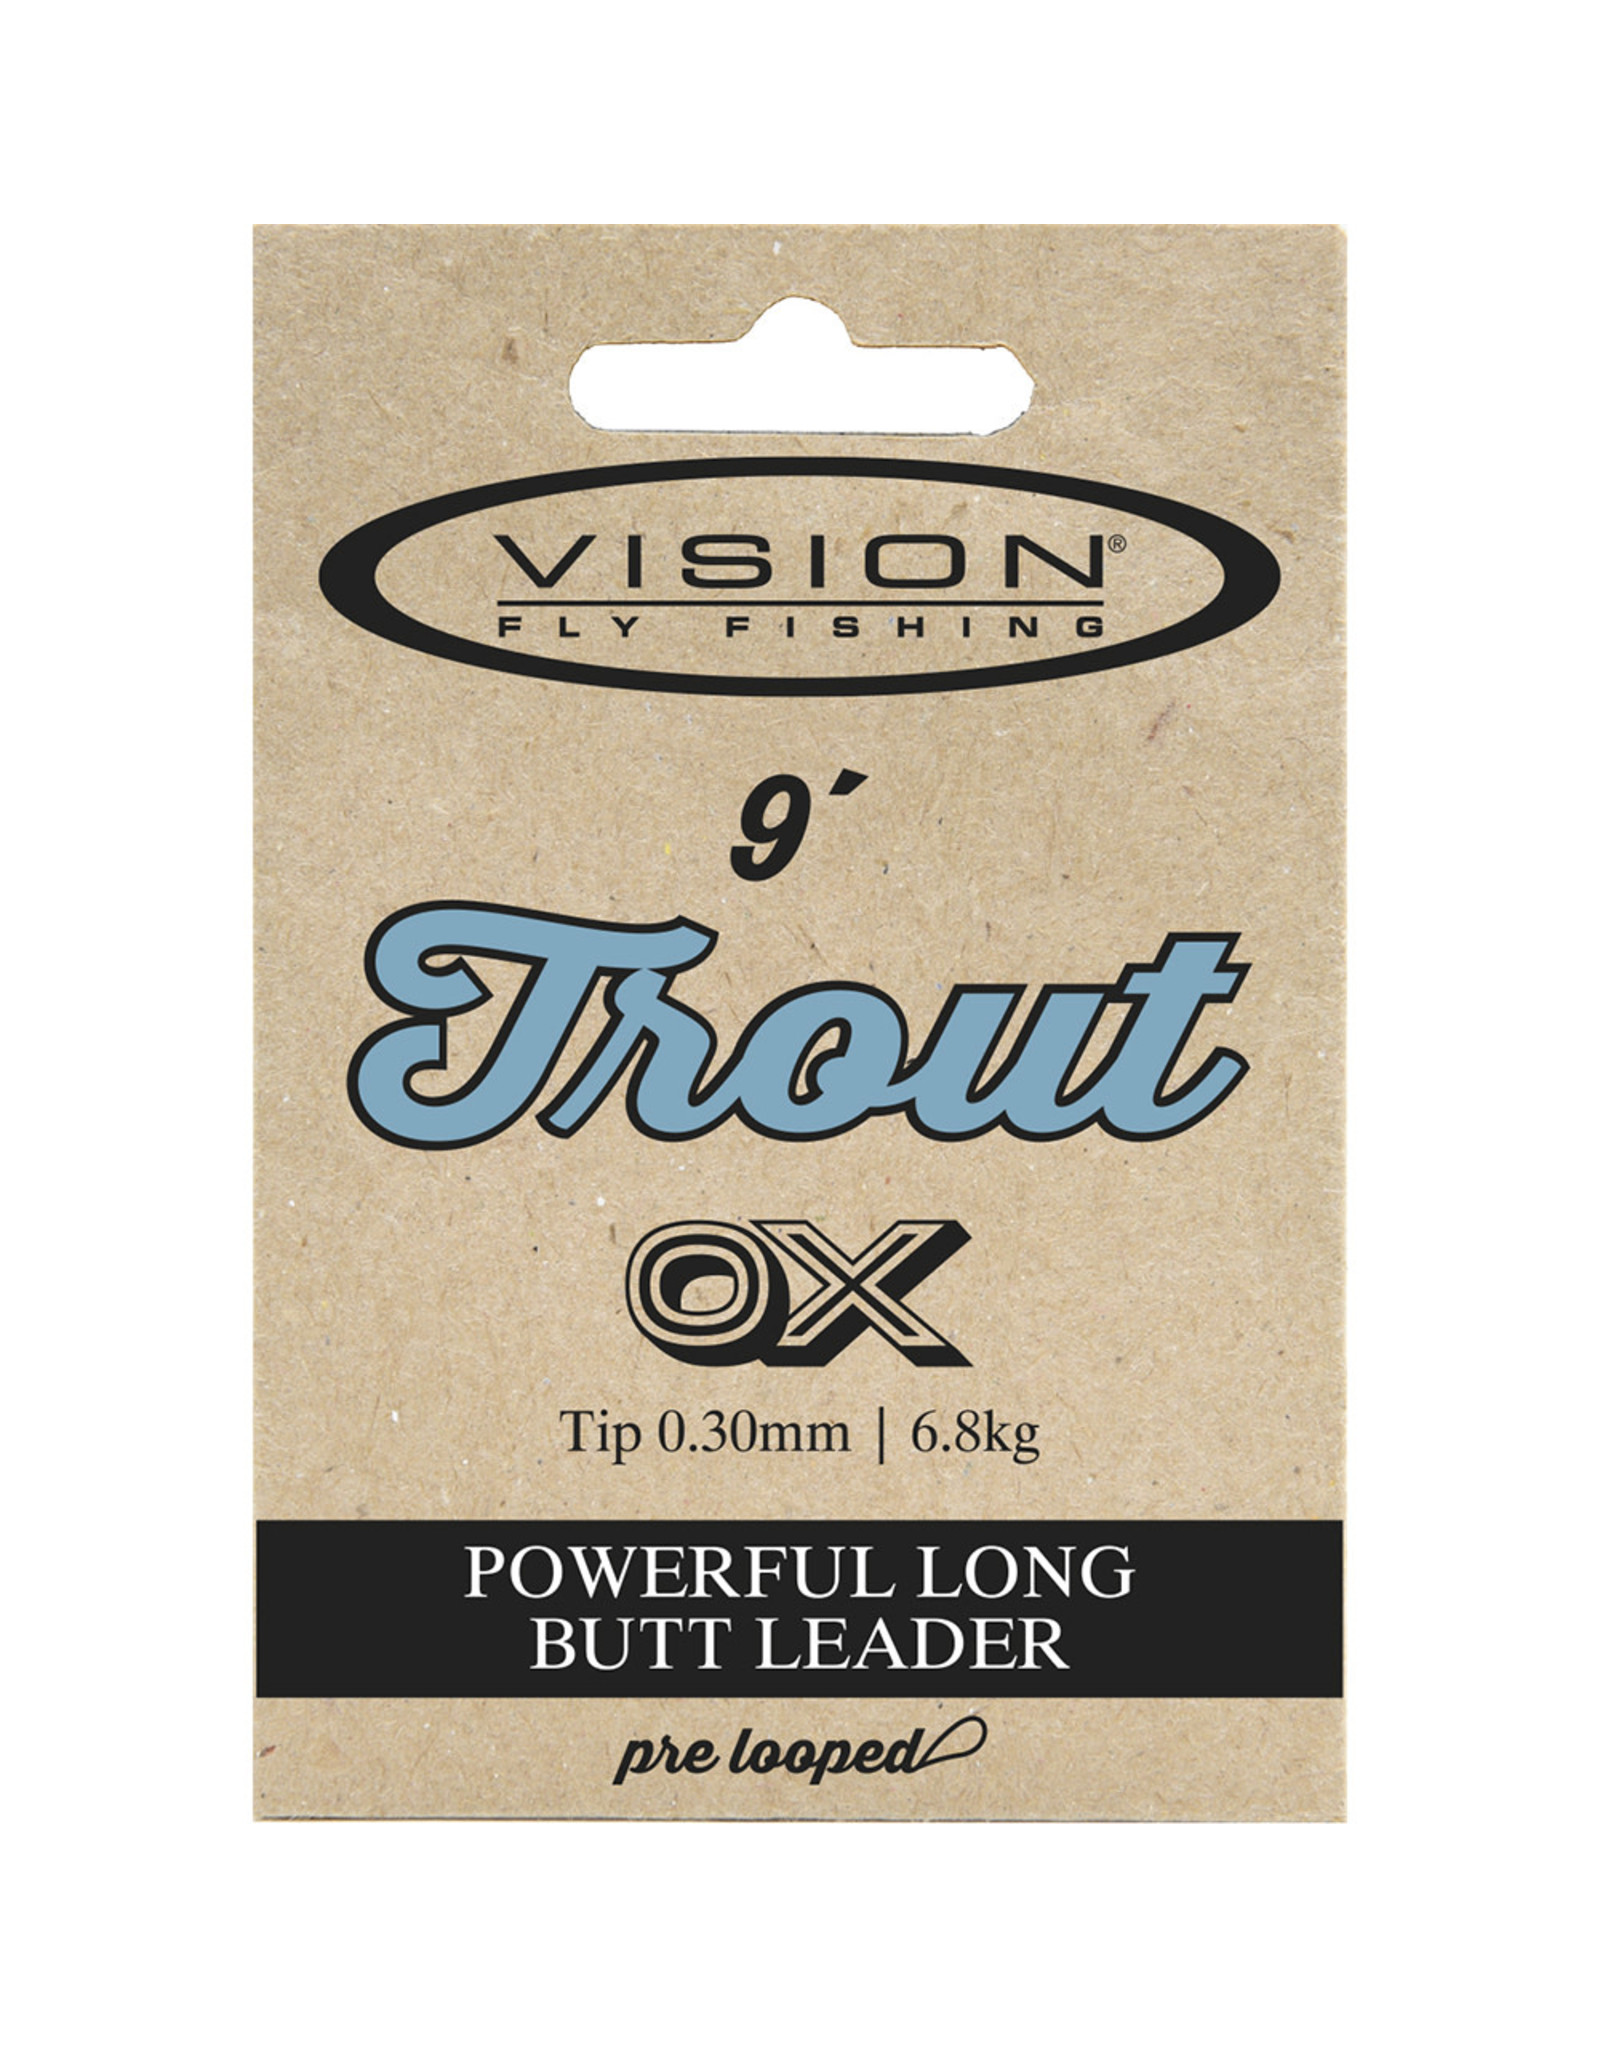 VISION FLY FISHING Trout Leader 9